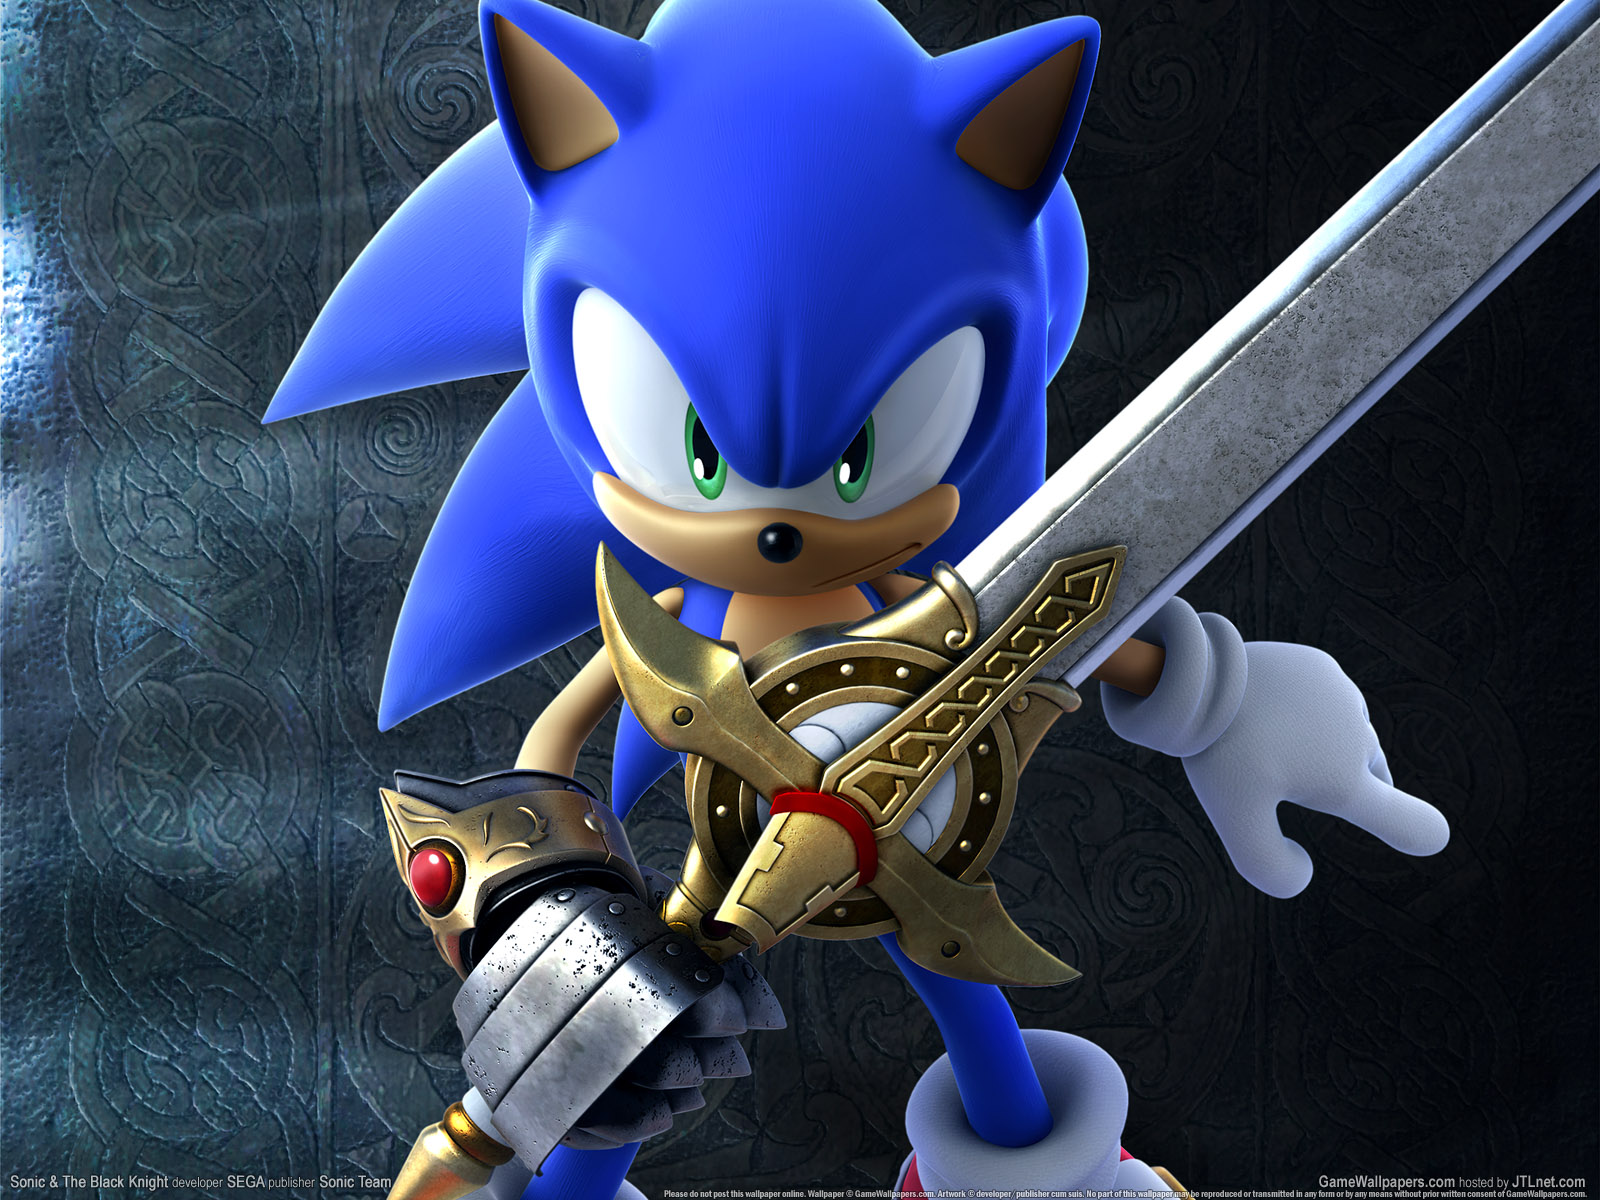 Sonic %26 The Black Knight achtergrond 01 1600x1200